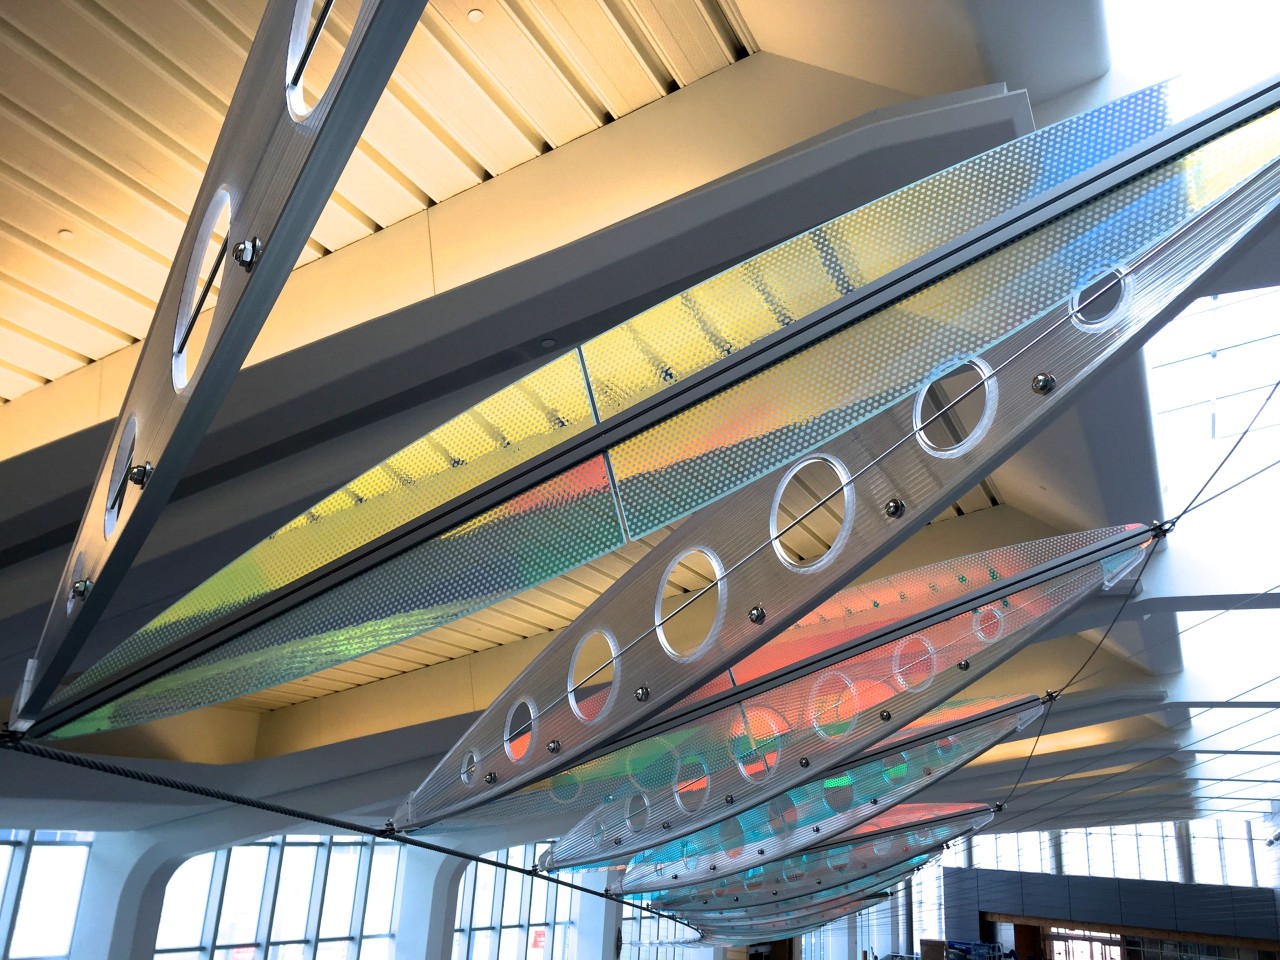 Ed Carpenter’s Wichita Dwight D. Eisenhower National Airport signature sculpture Aloft delights travelers with colorful laminated safety dichroic glass above. | Image 14 | Ed Carpenter, Artist